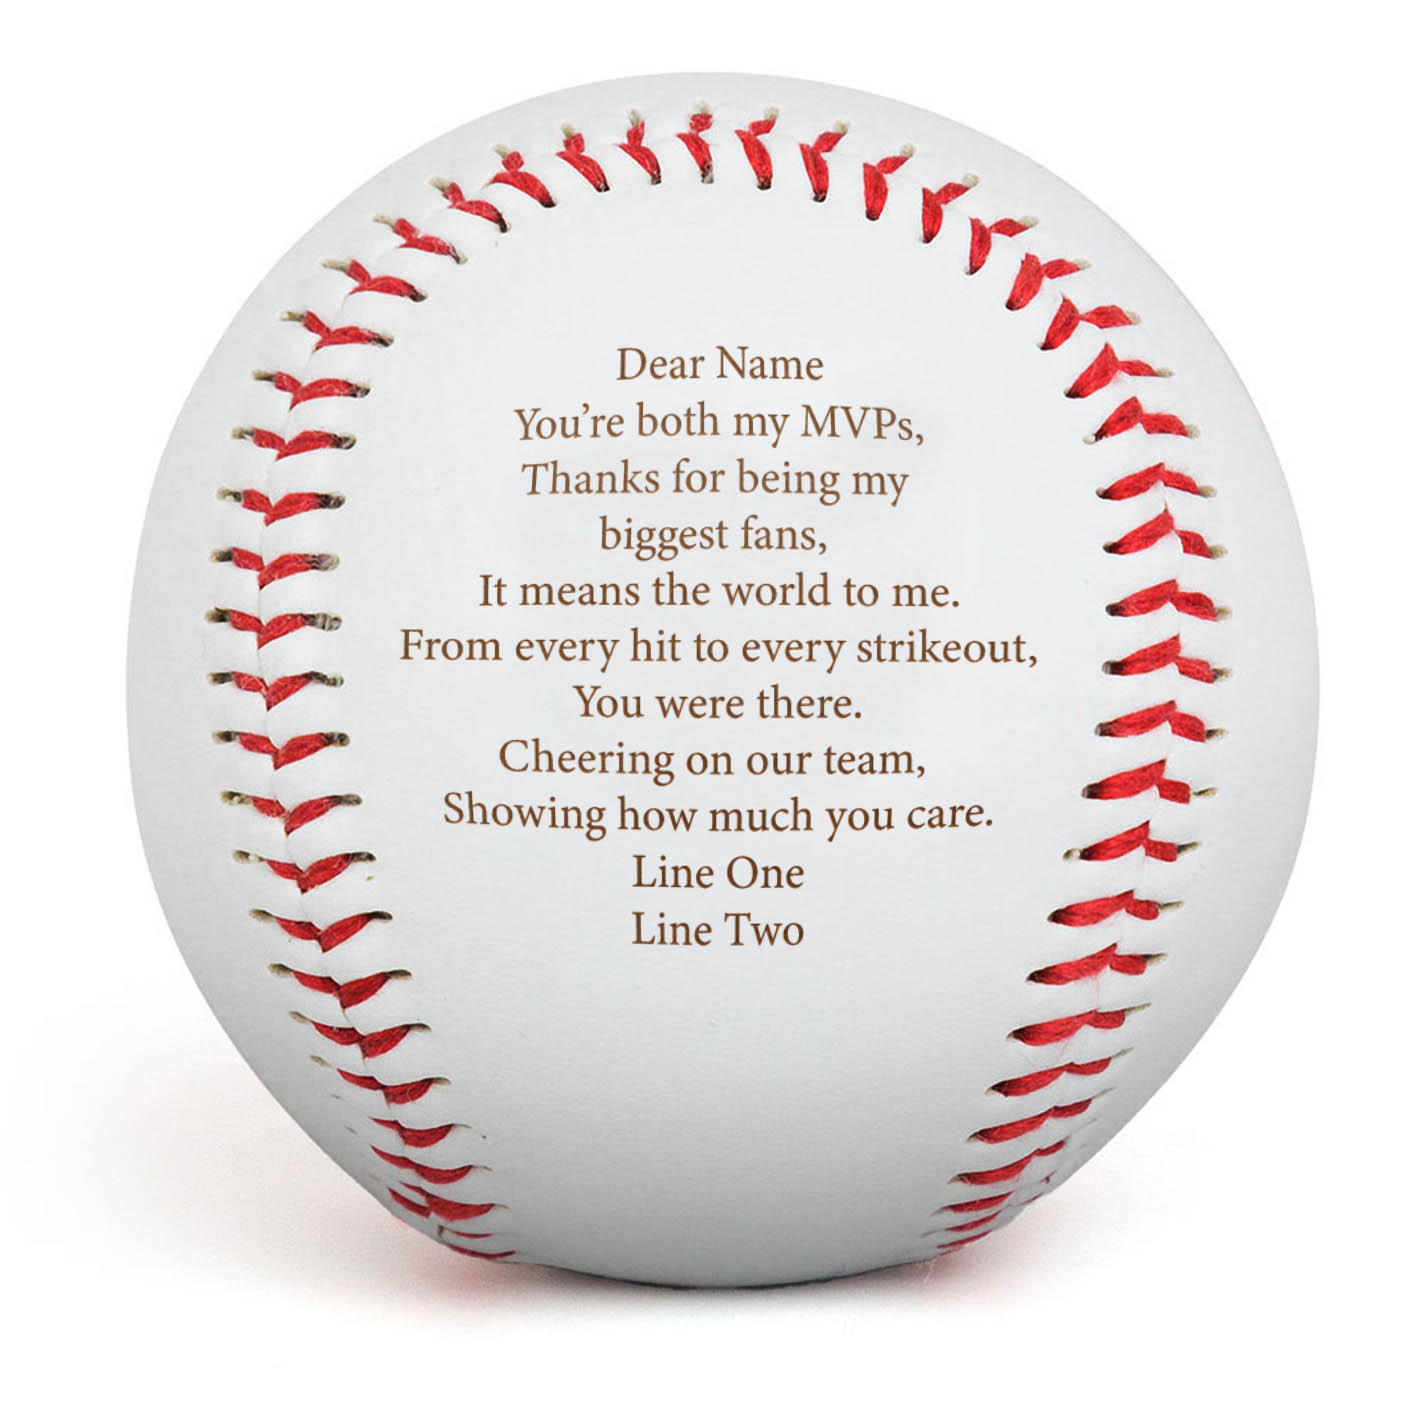 Engraved Baseball - To Someone Special - Personalization Image